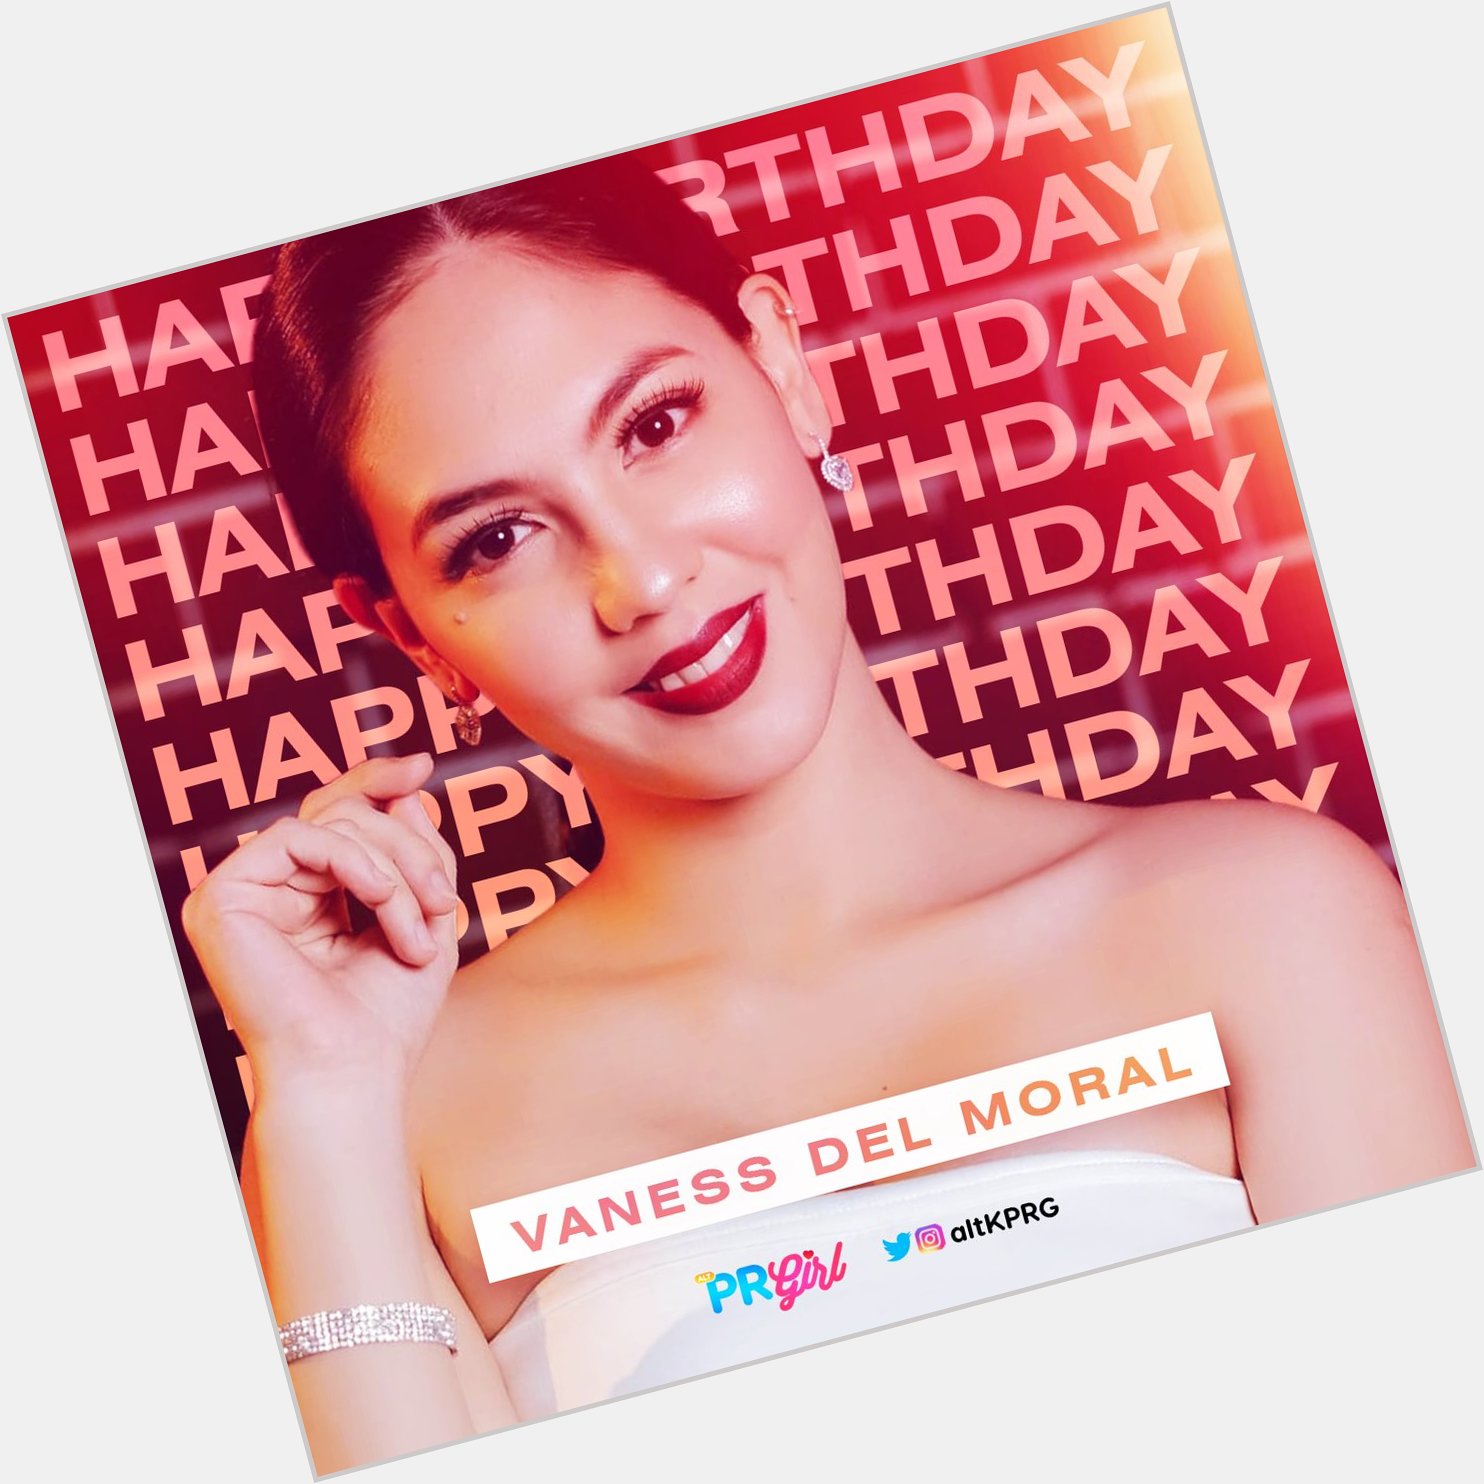 Happy Birthday, Kapuso Vaness Del Moral! Wishing you great success in everything you do.   